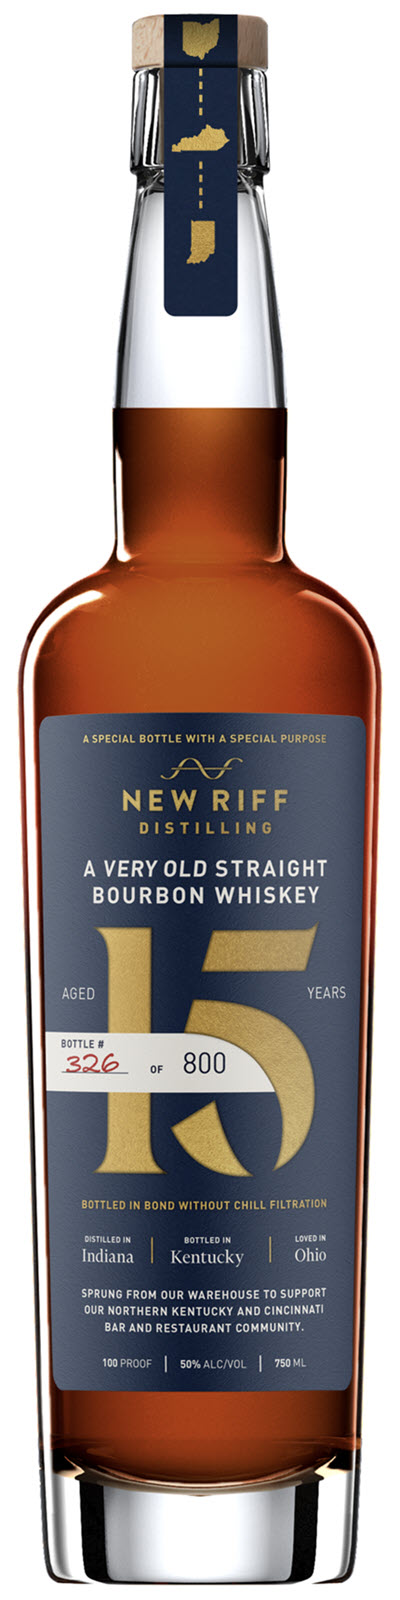 New Riff Distilling - A Very Old Straight Bourbon Whiskey